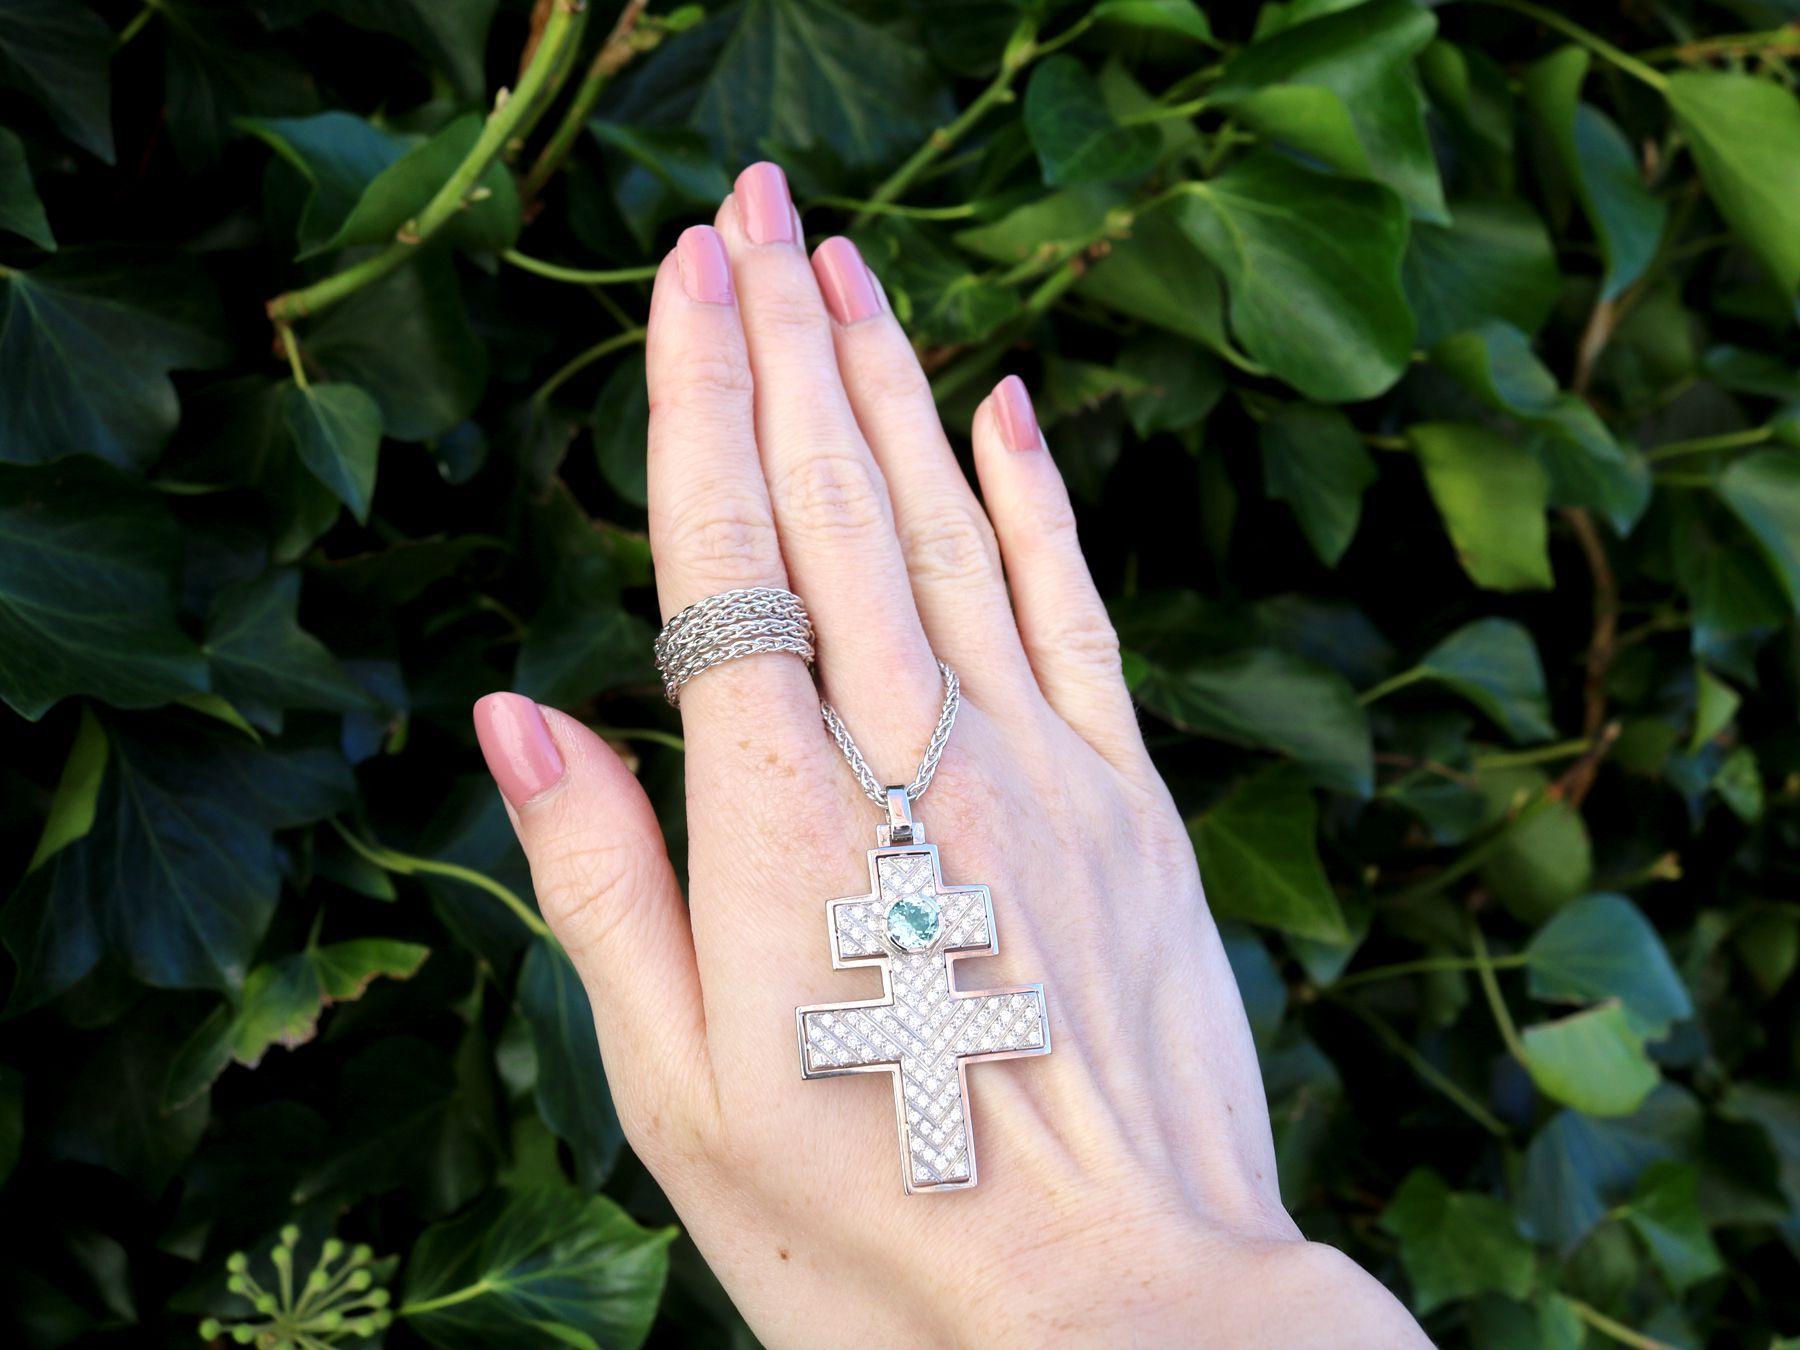 A stunning, fine and impressive 1.55 carat diamond and 0.80 carat aquamarine, 18 karat white gold cross pendant; part of our diverse vintage jewelry and estate jewelry collections.

This impressive vintage pendant has been crafted in 18k white